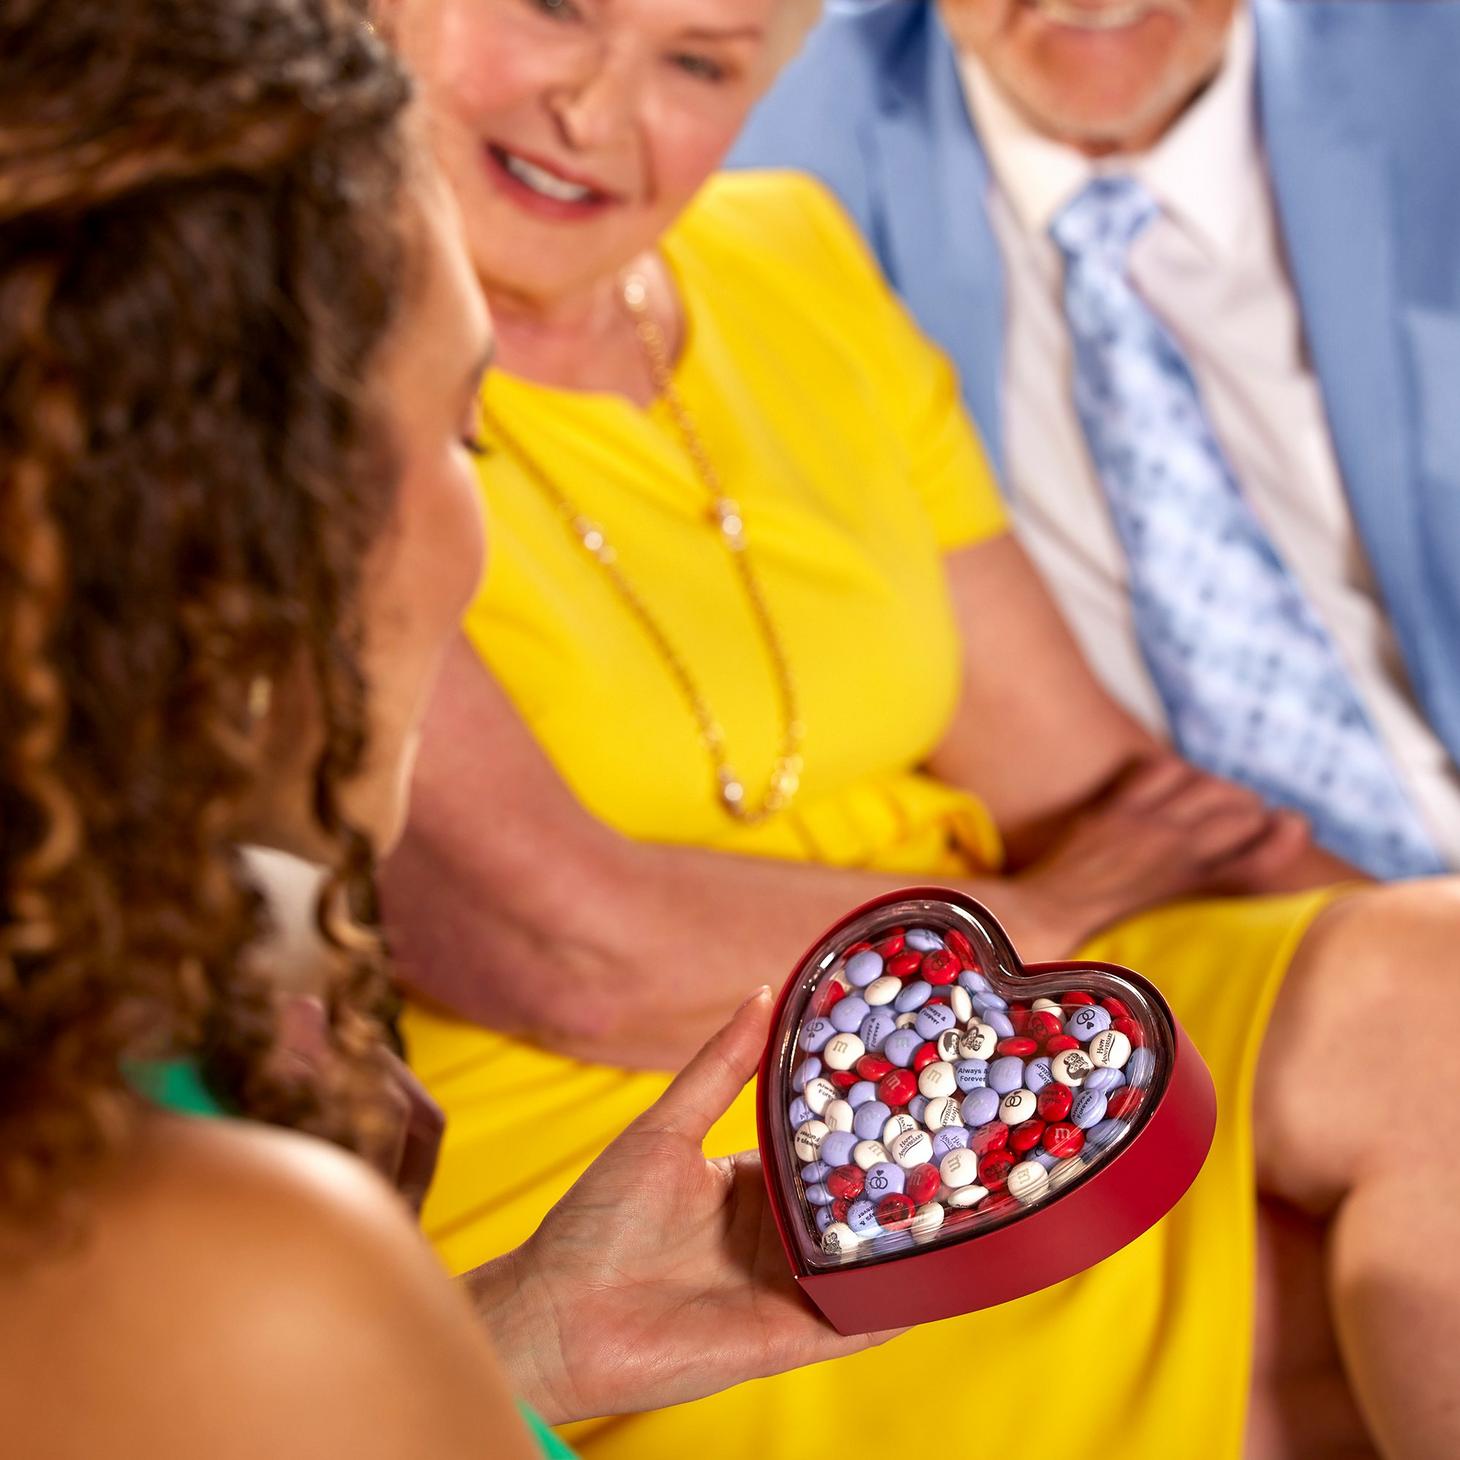 woman admiring heart gift box filled with M&M'S with grandparents in the background